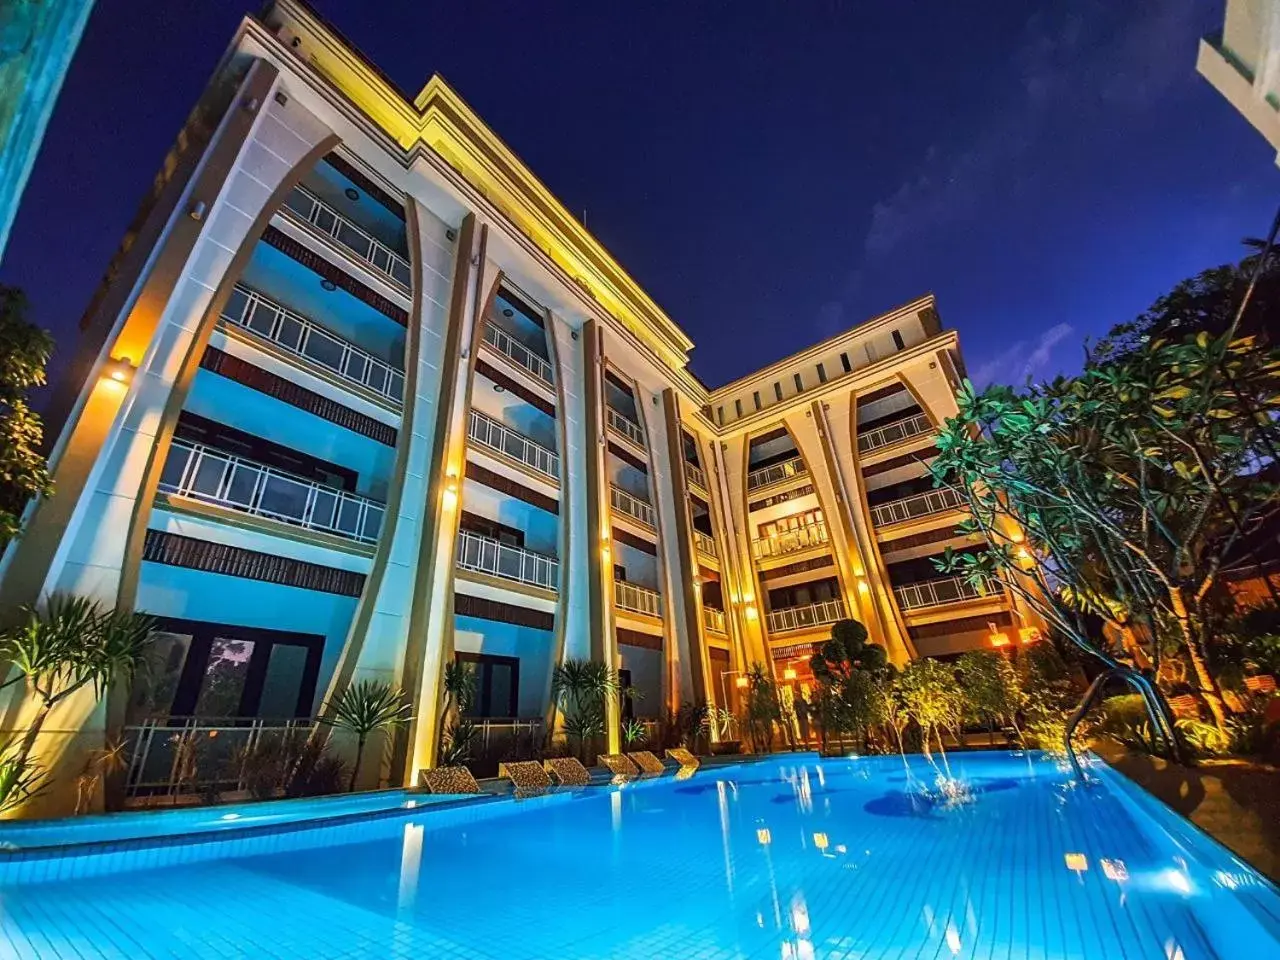 Property building, Swimming Pool in The Night Hotel